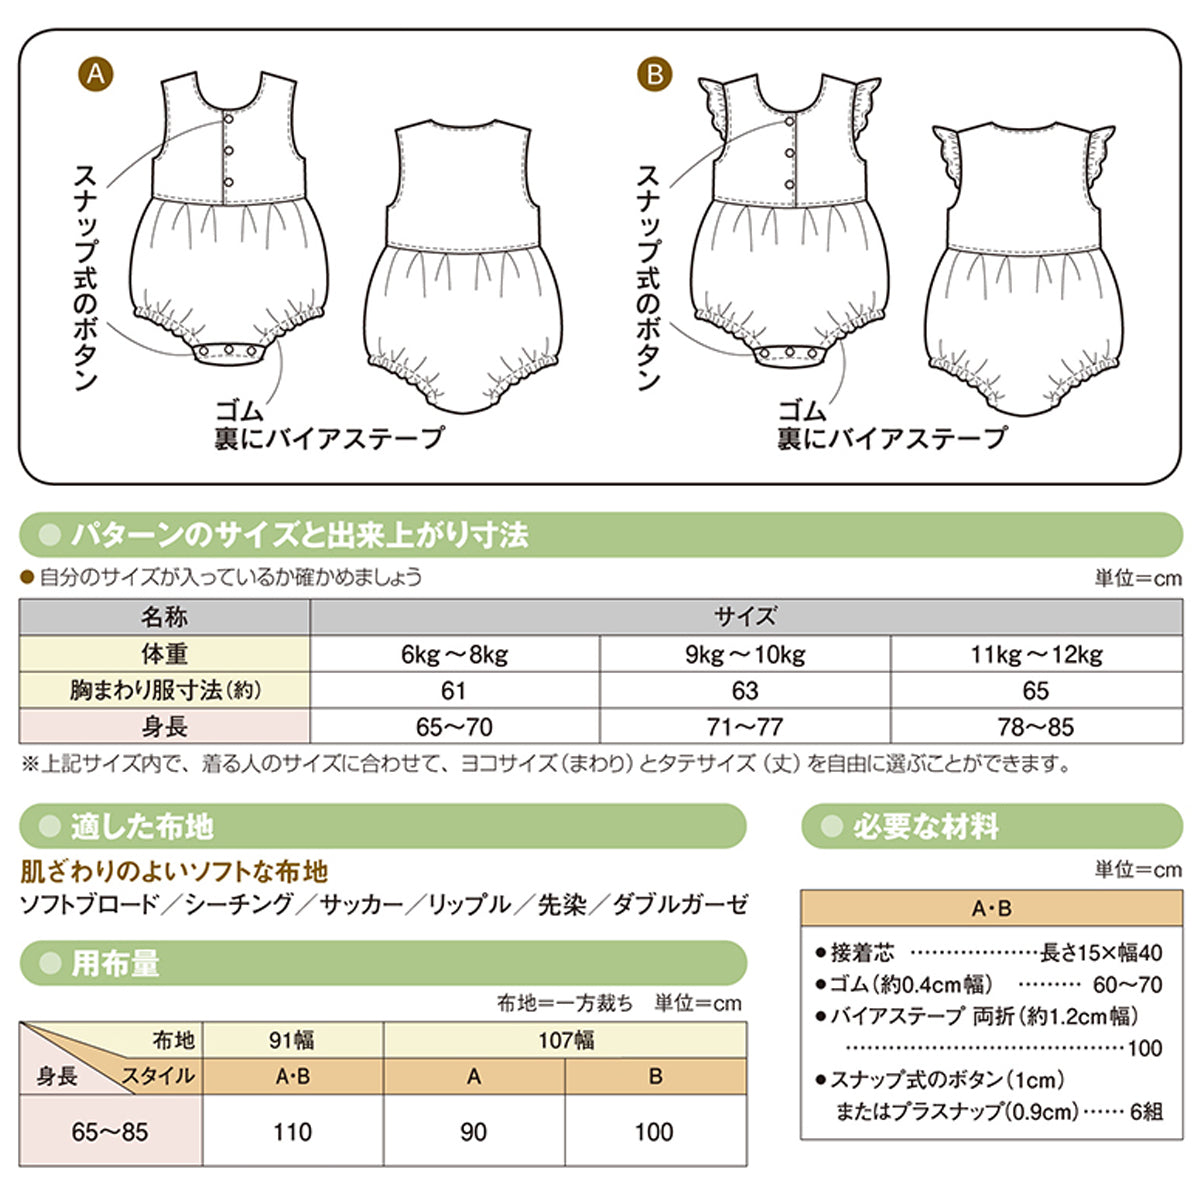 BABYS Rompers | Paper pattern - forestfabric 布恩堂